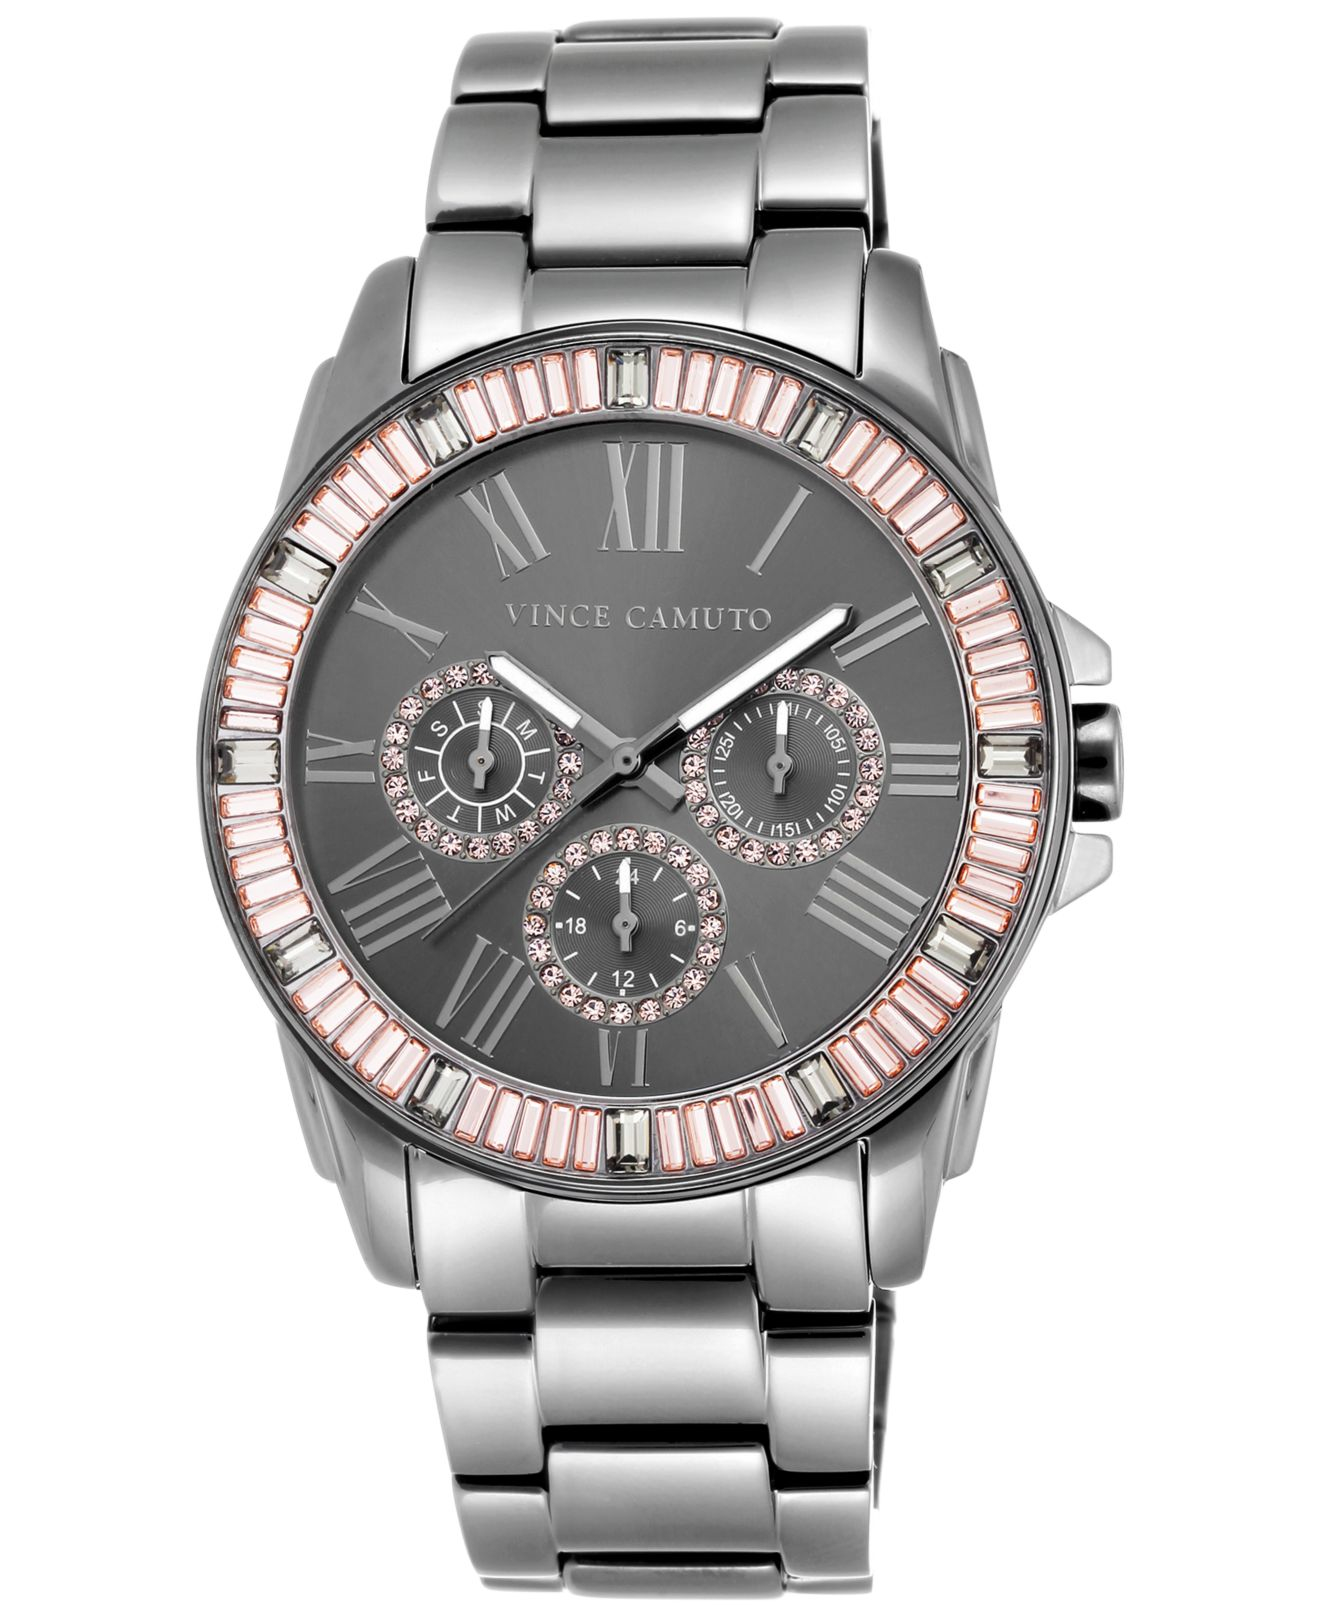 Lyst - Vince Camuto Women's Gray Stainless Steel Bracelet Watch 43mm Vc ...